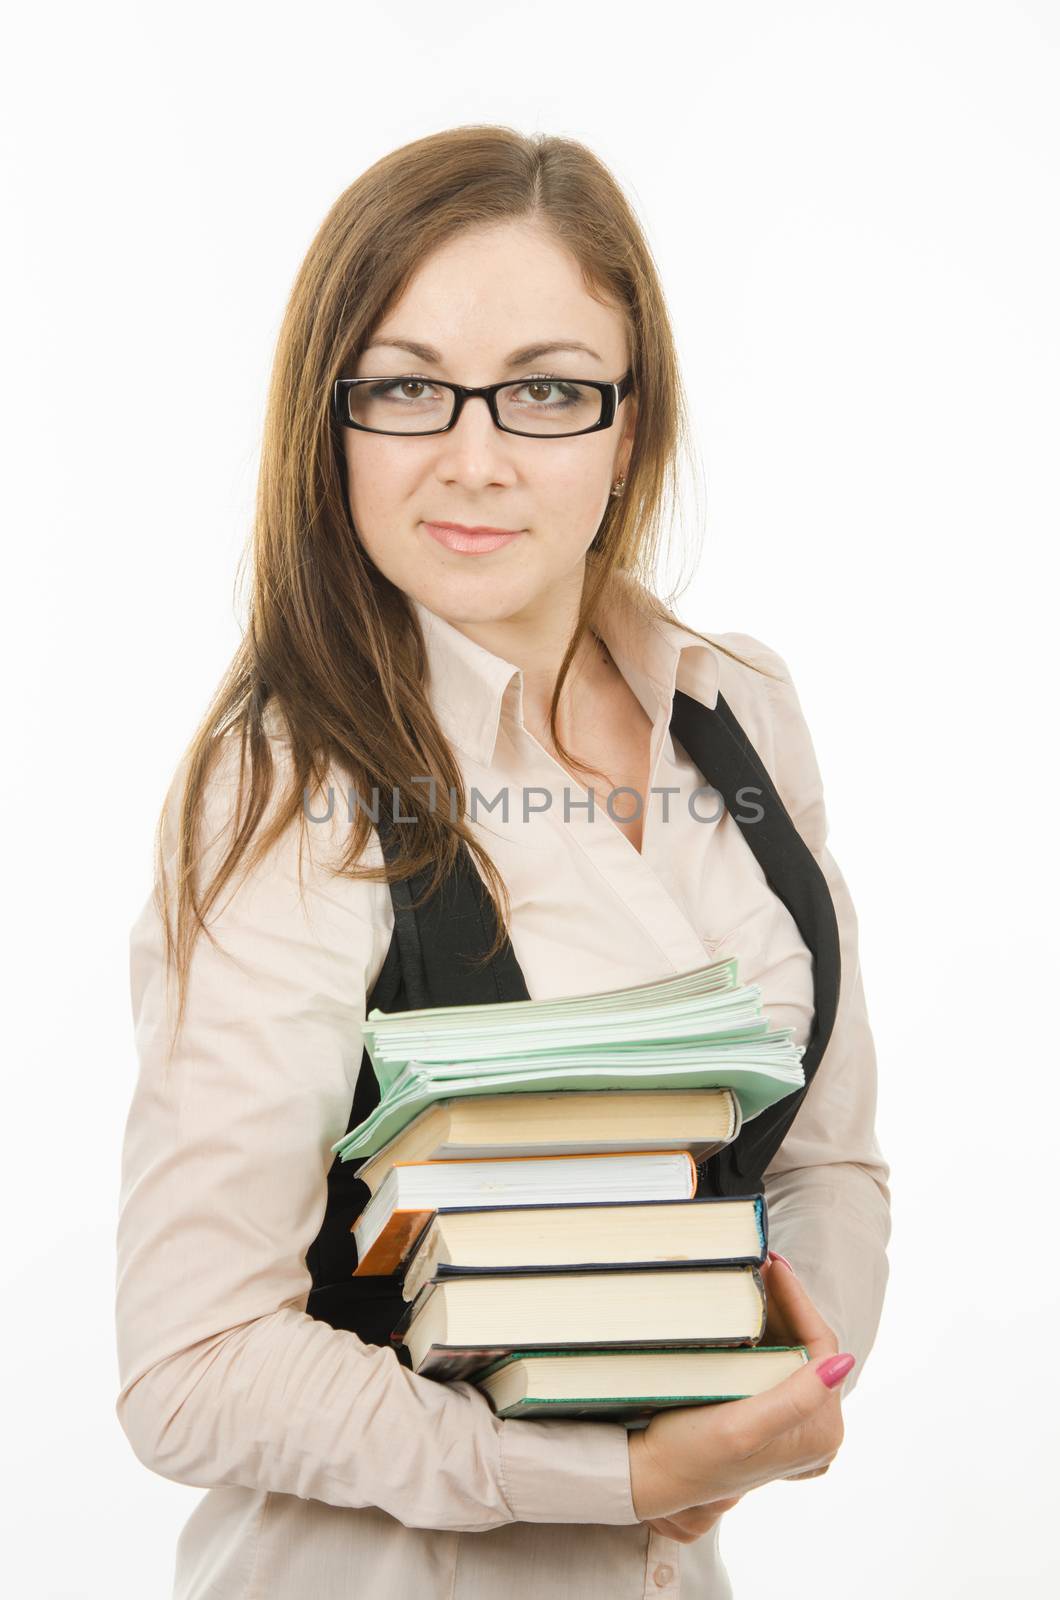 Portrait of a young girl of twenty-five teachers or office specialist